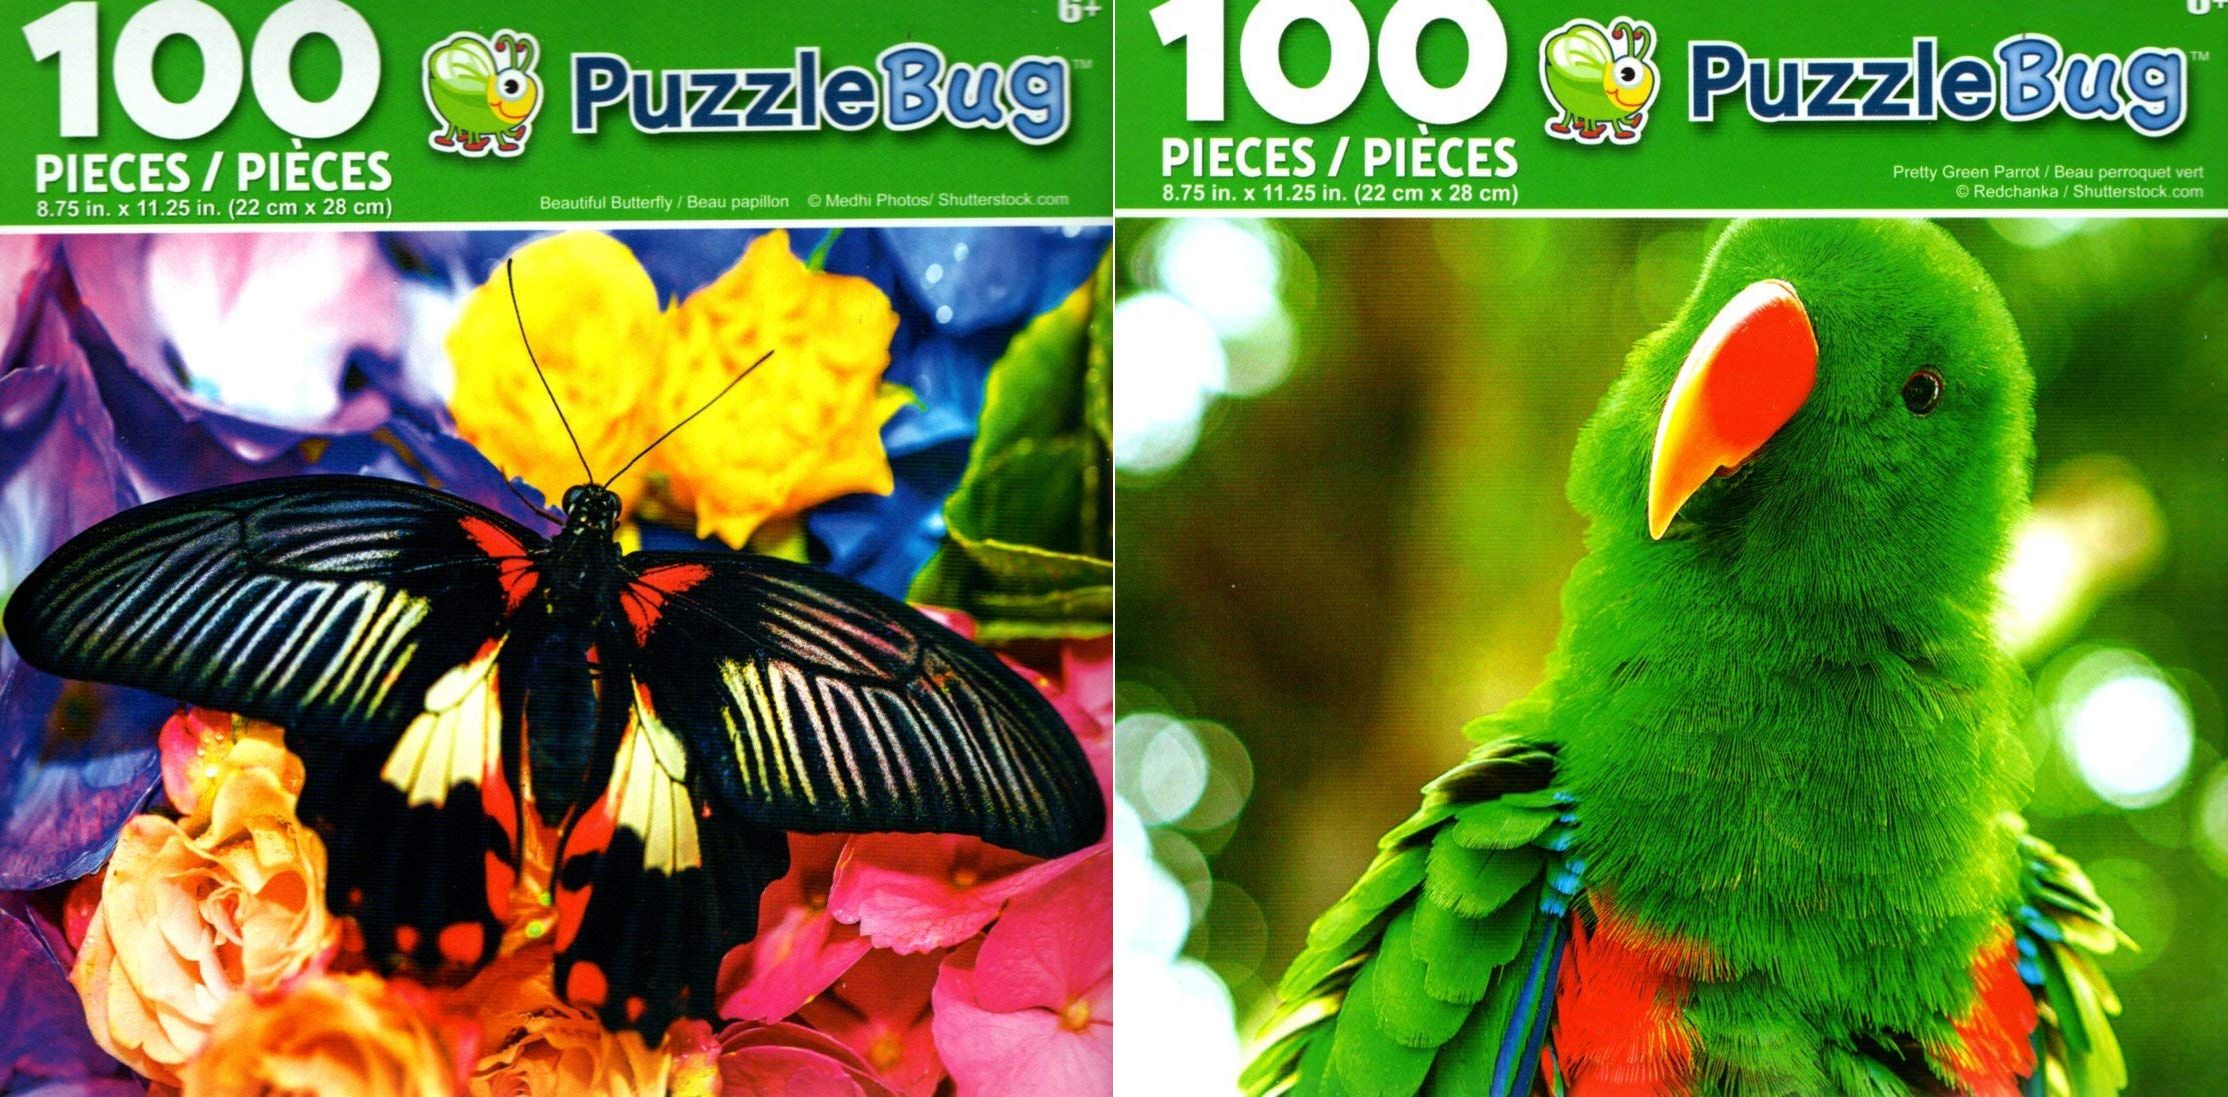 PUZZLEBUG 100 Puzzle BEAUTIFUL BUTTERFLY 8.75" X 11.25"